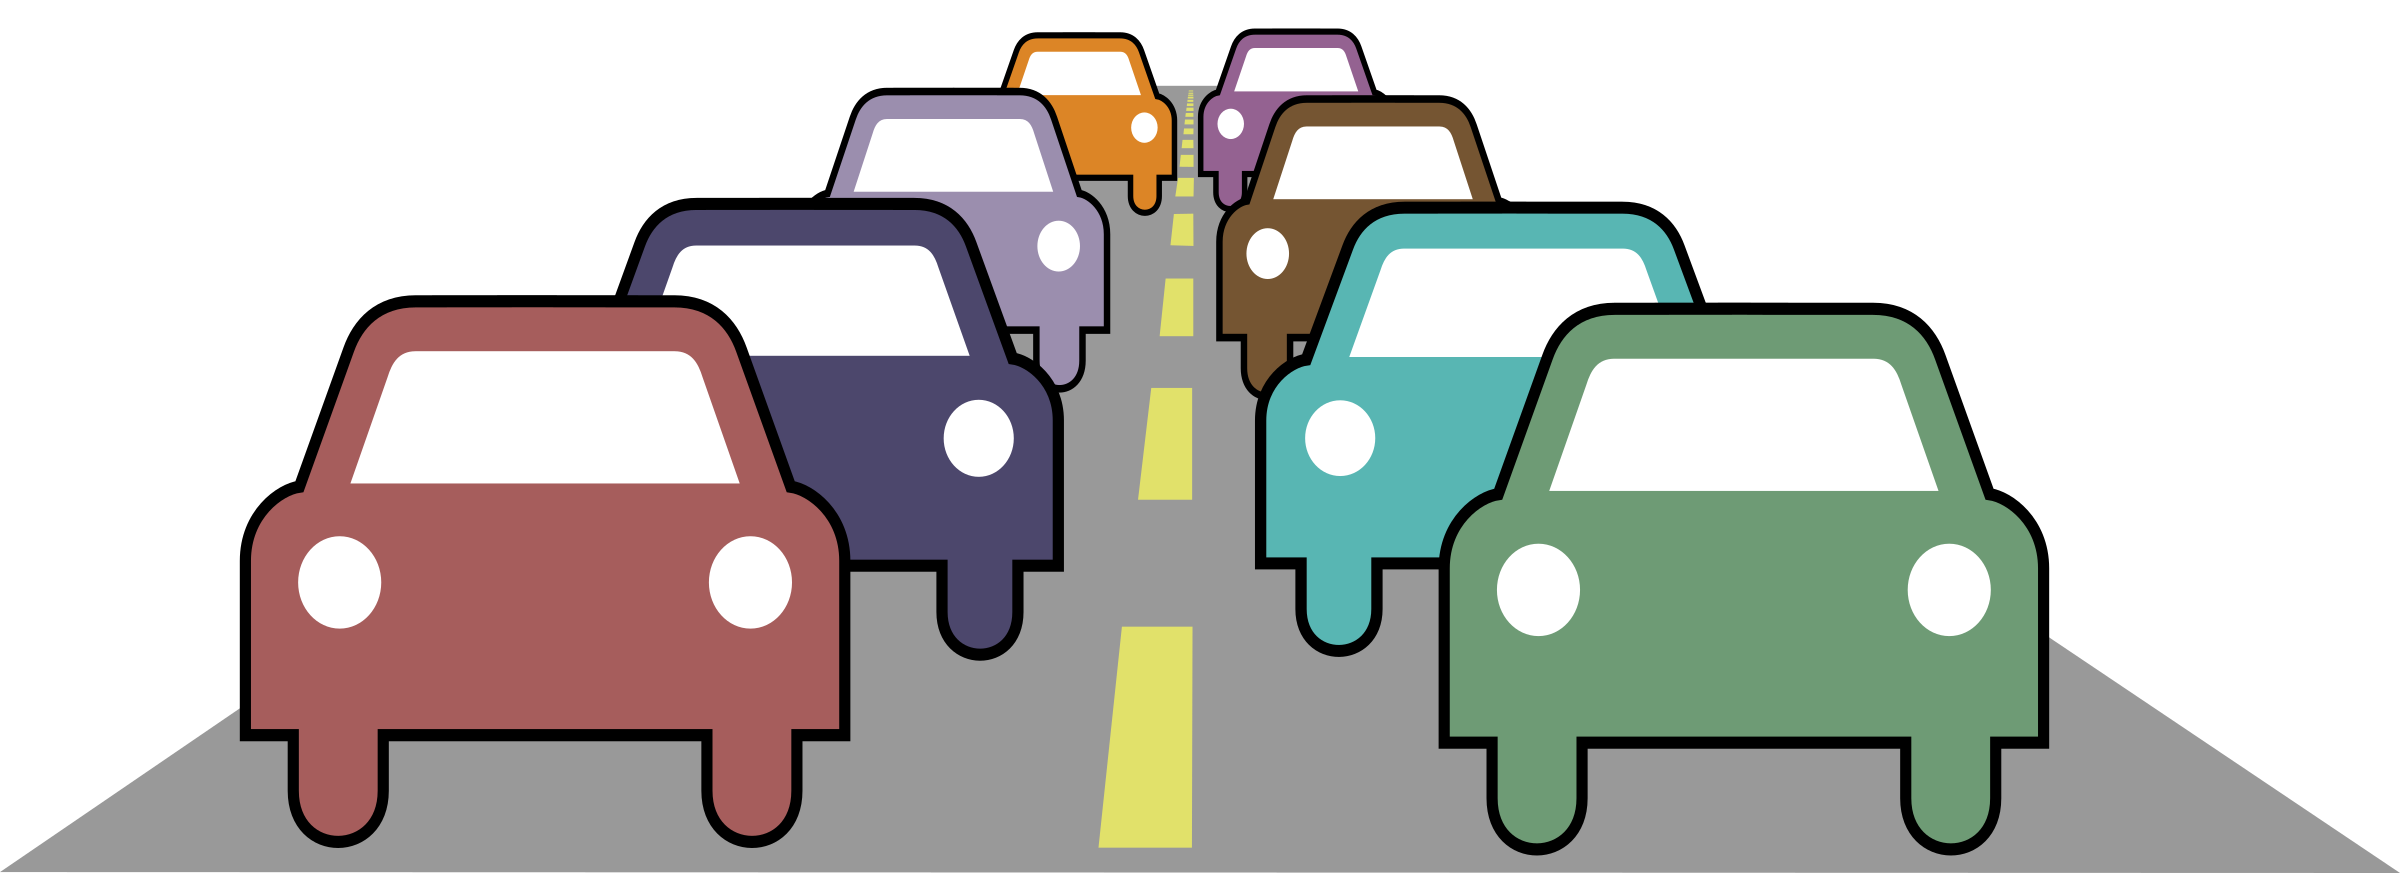 Jam clipart trafic, Jam trafic Transparent FREE for download on